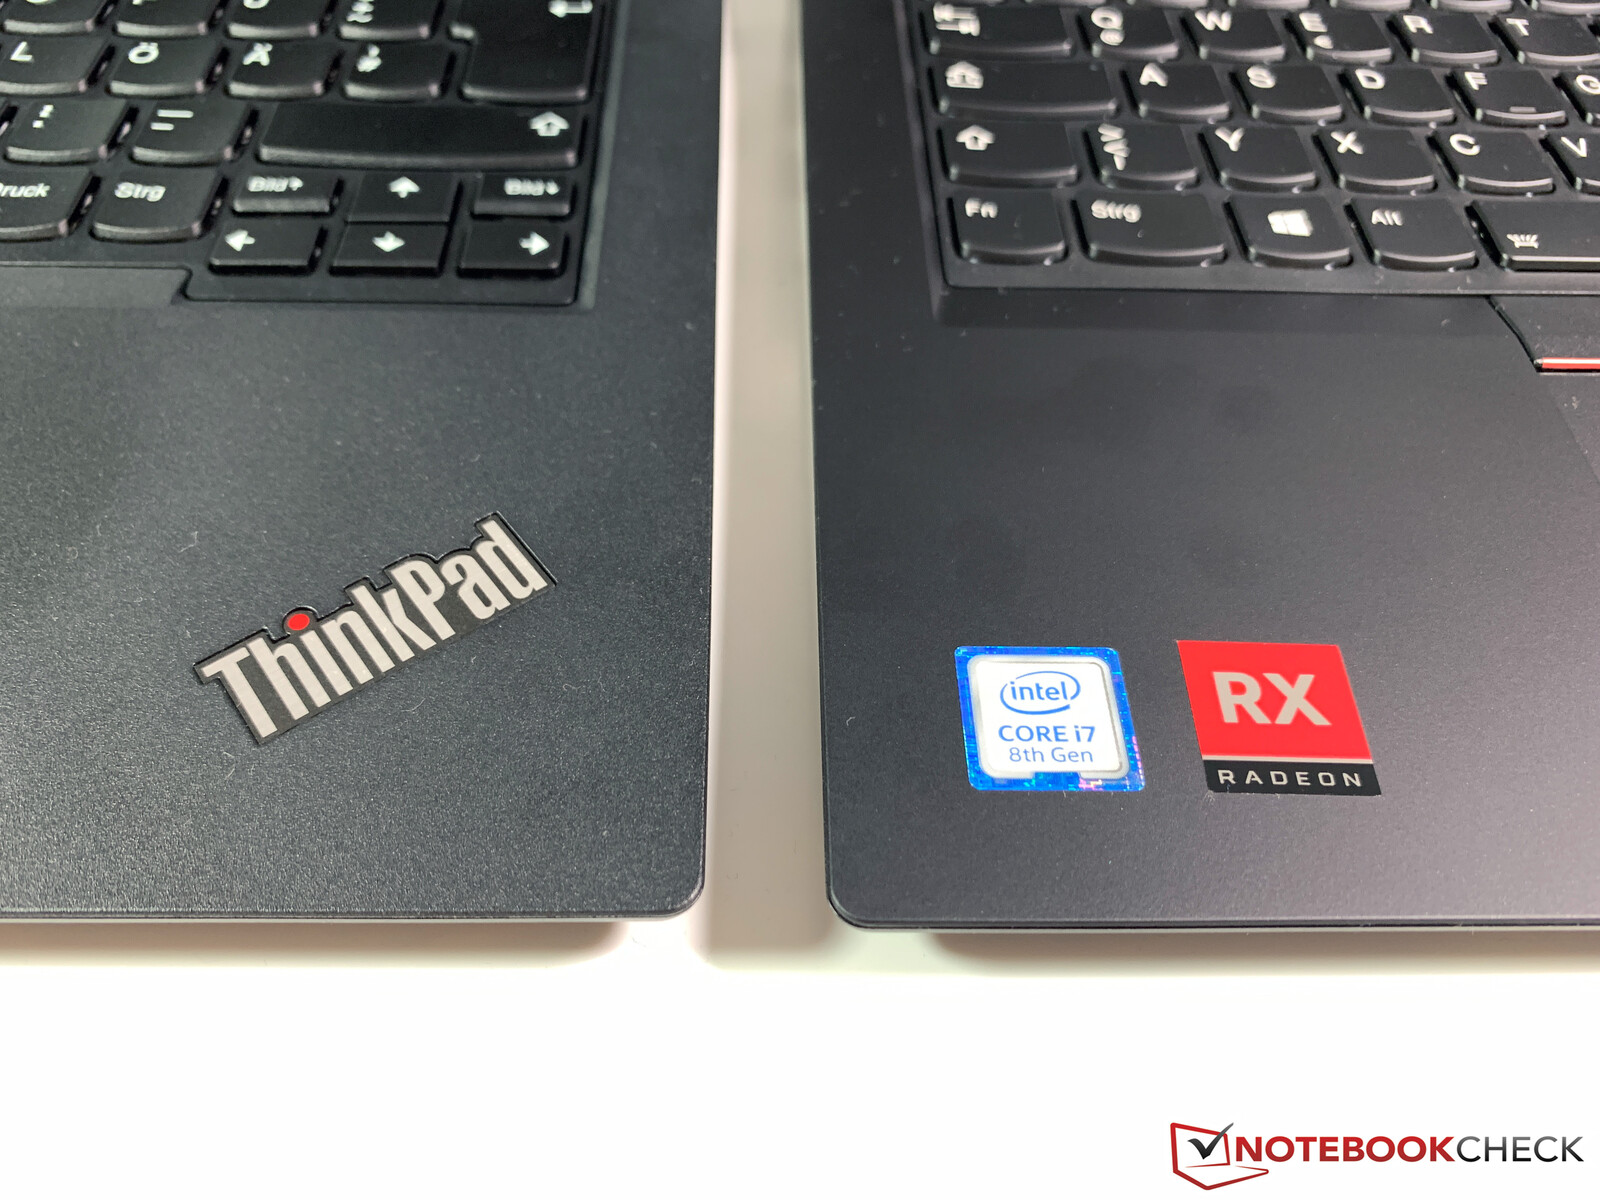 Lenovo ThinkPad E495 Laptop Review: Inexpensive office device with